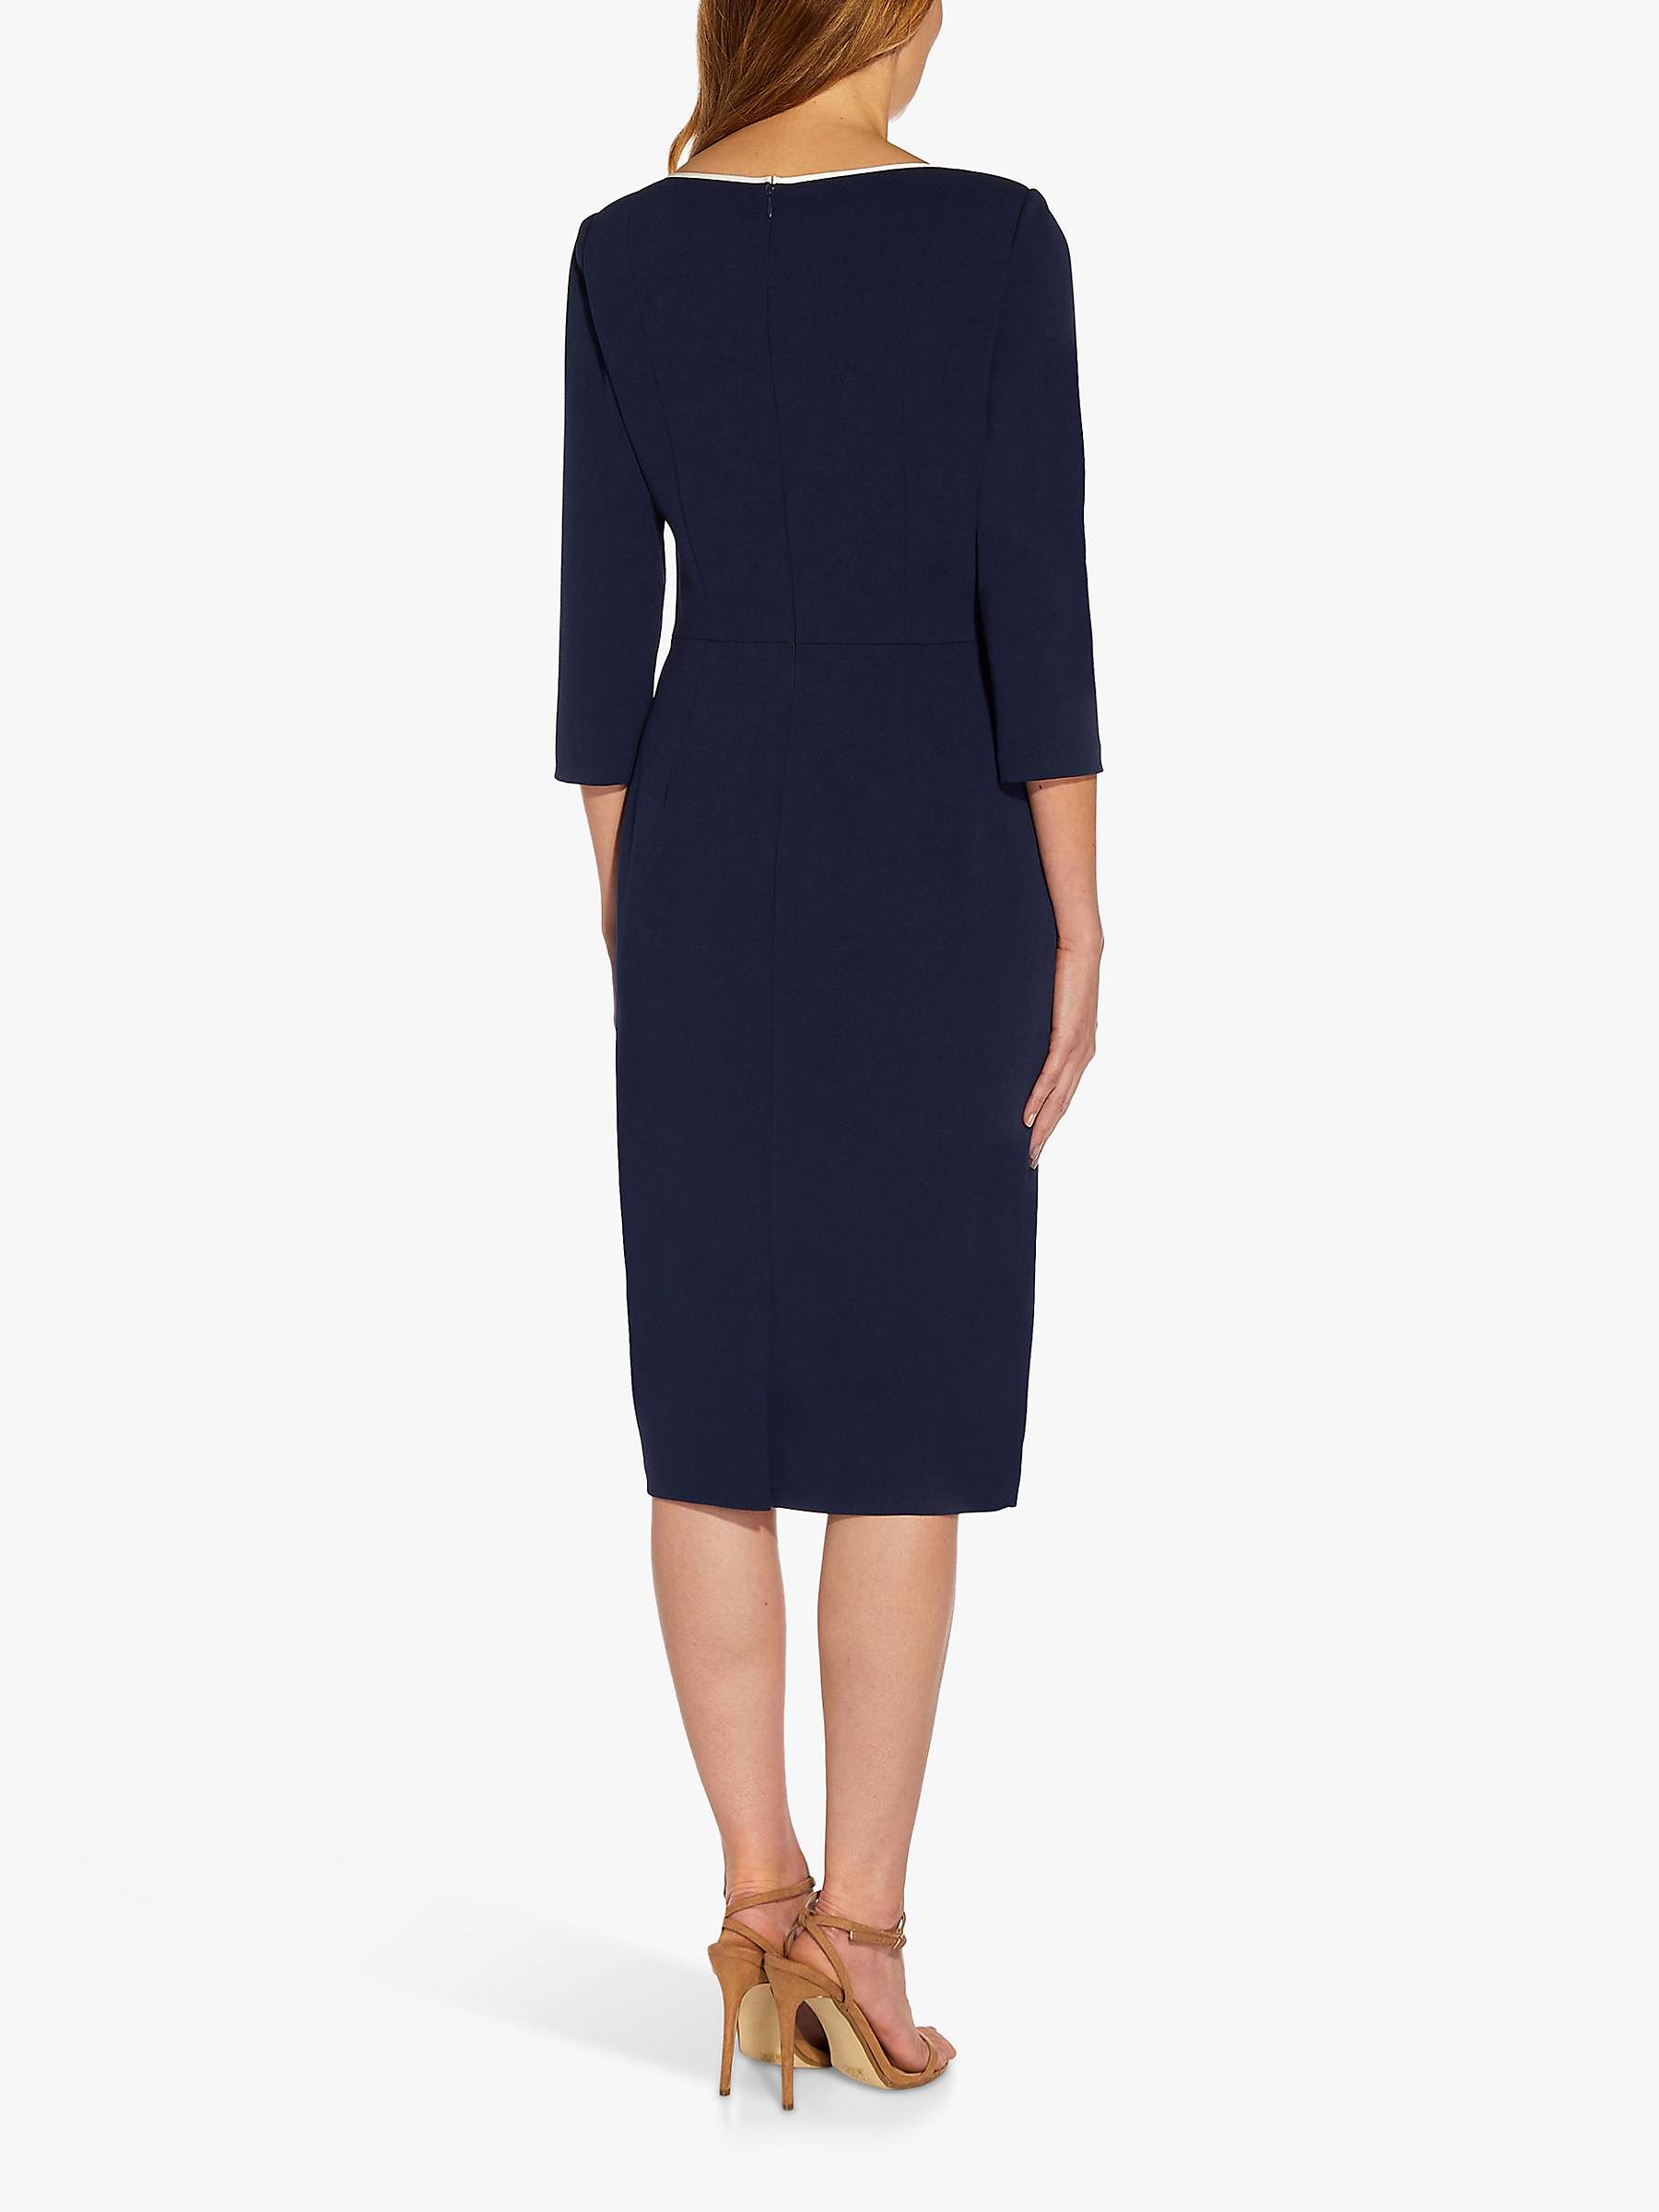 Buy Adrianna Papell Tipped Crepe Tie Waist Midi Dress Online at johnlewis.com